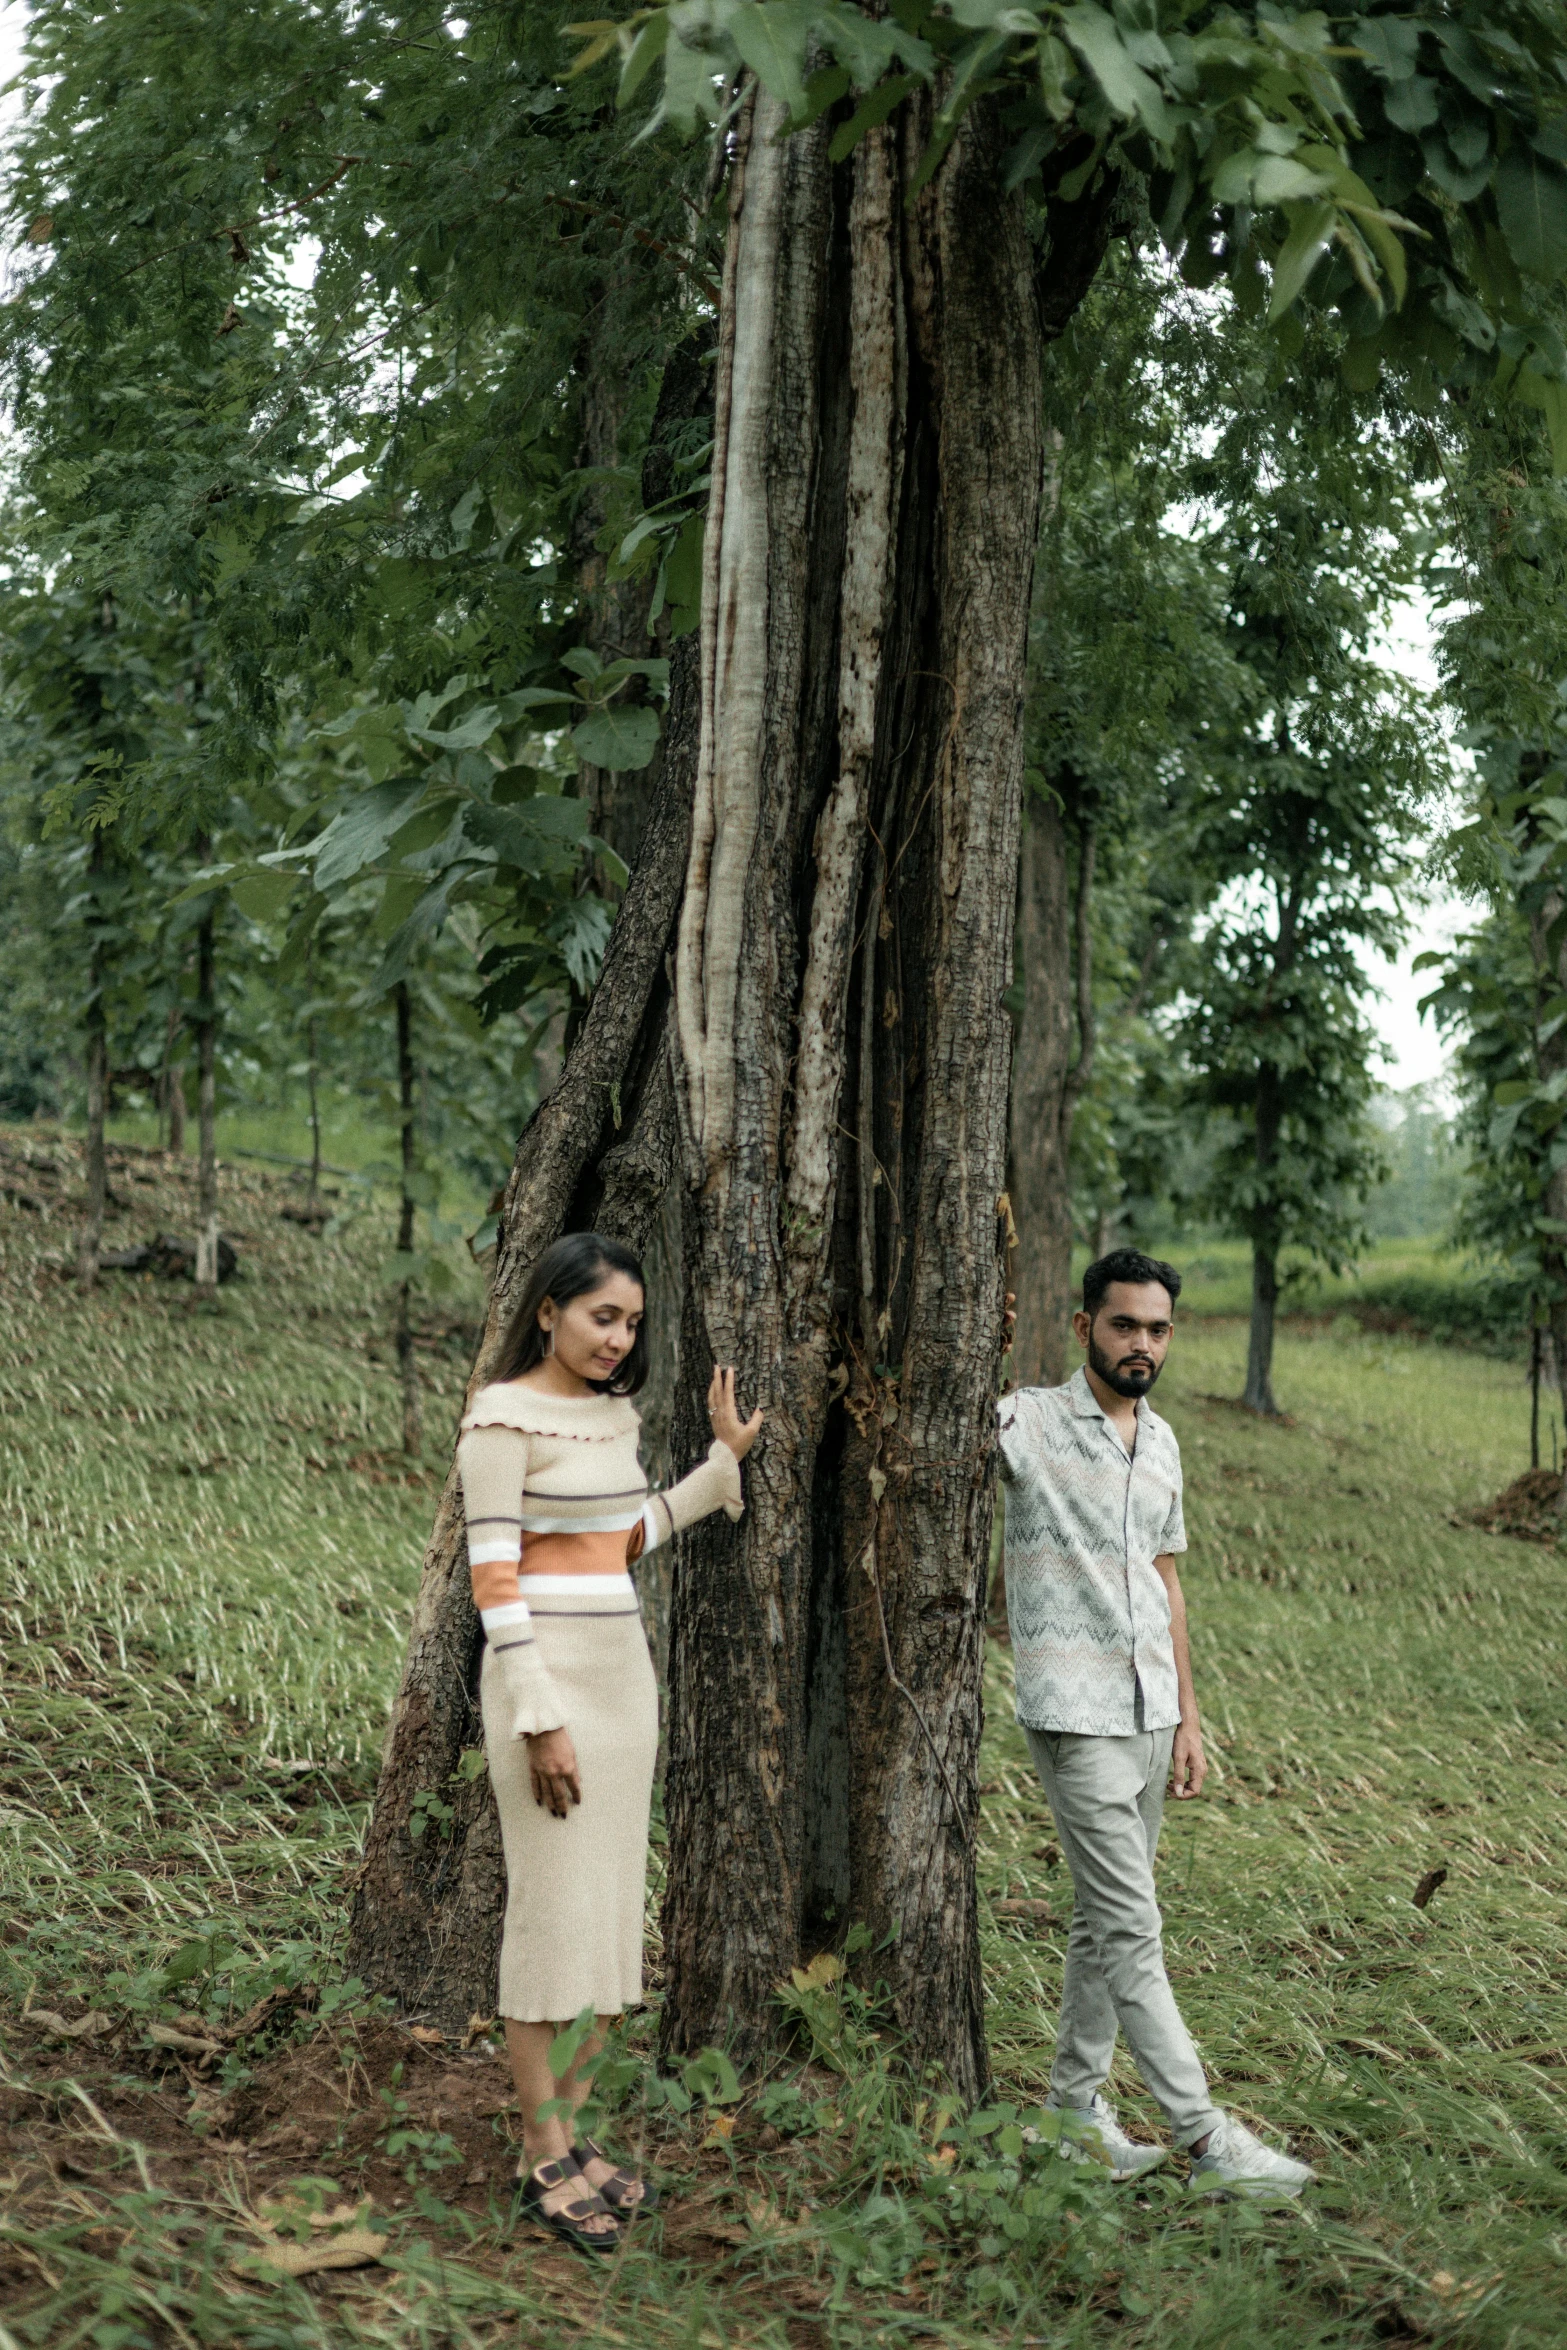 two young people standing by a tree on a green grass covered field